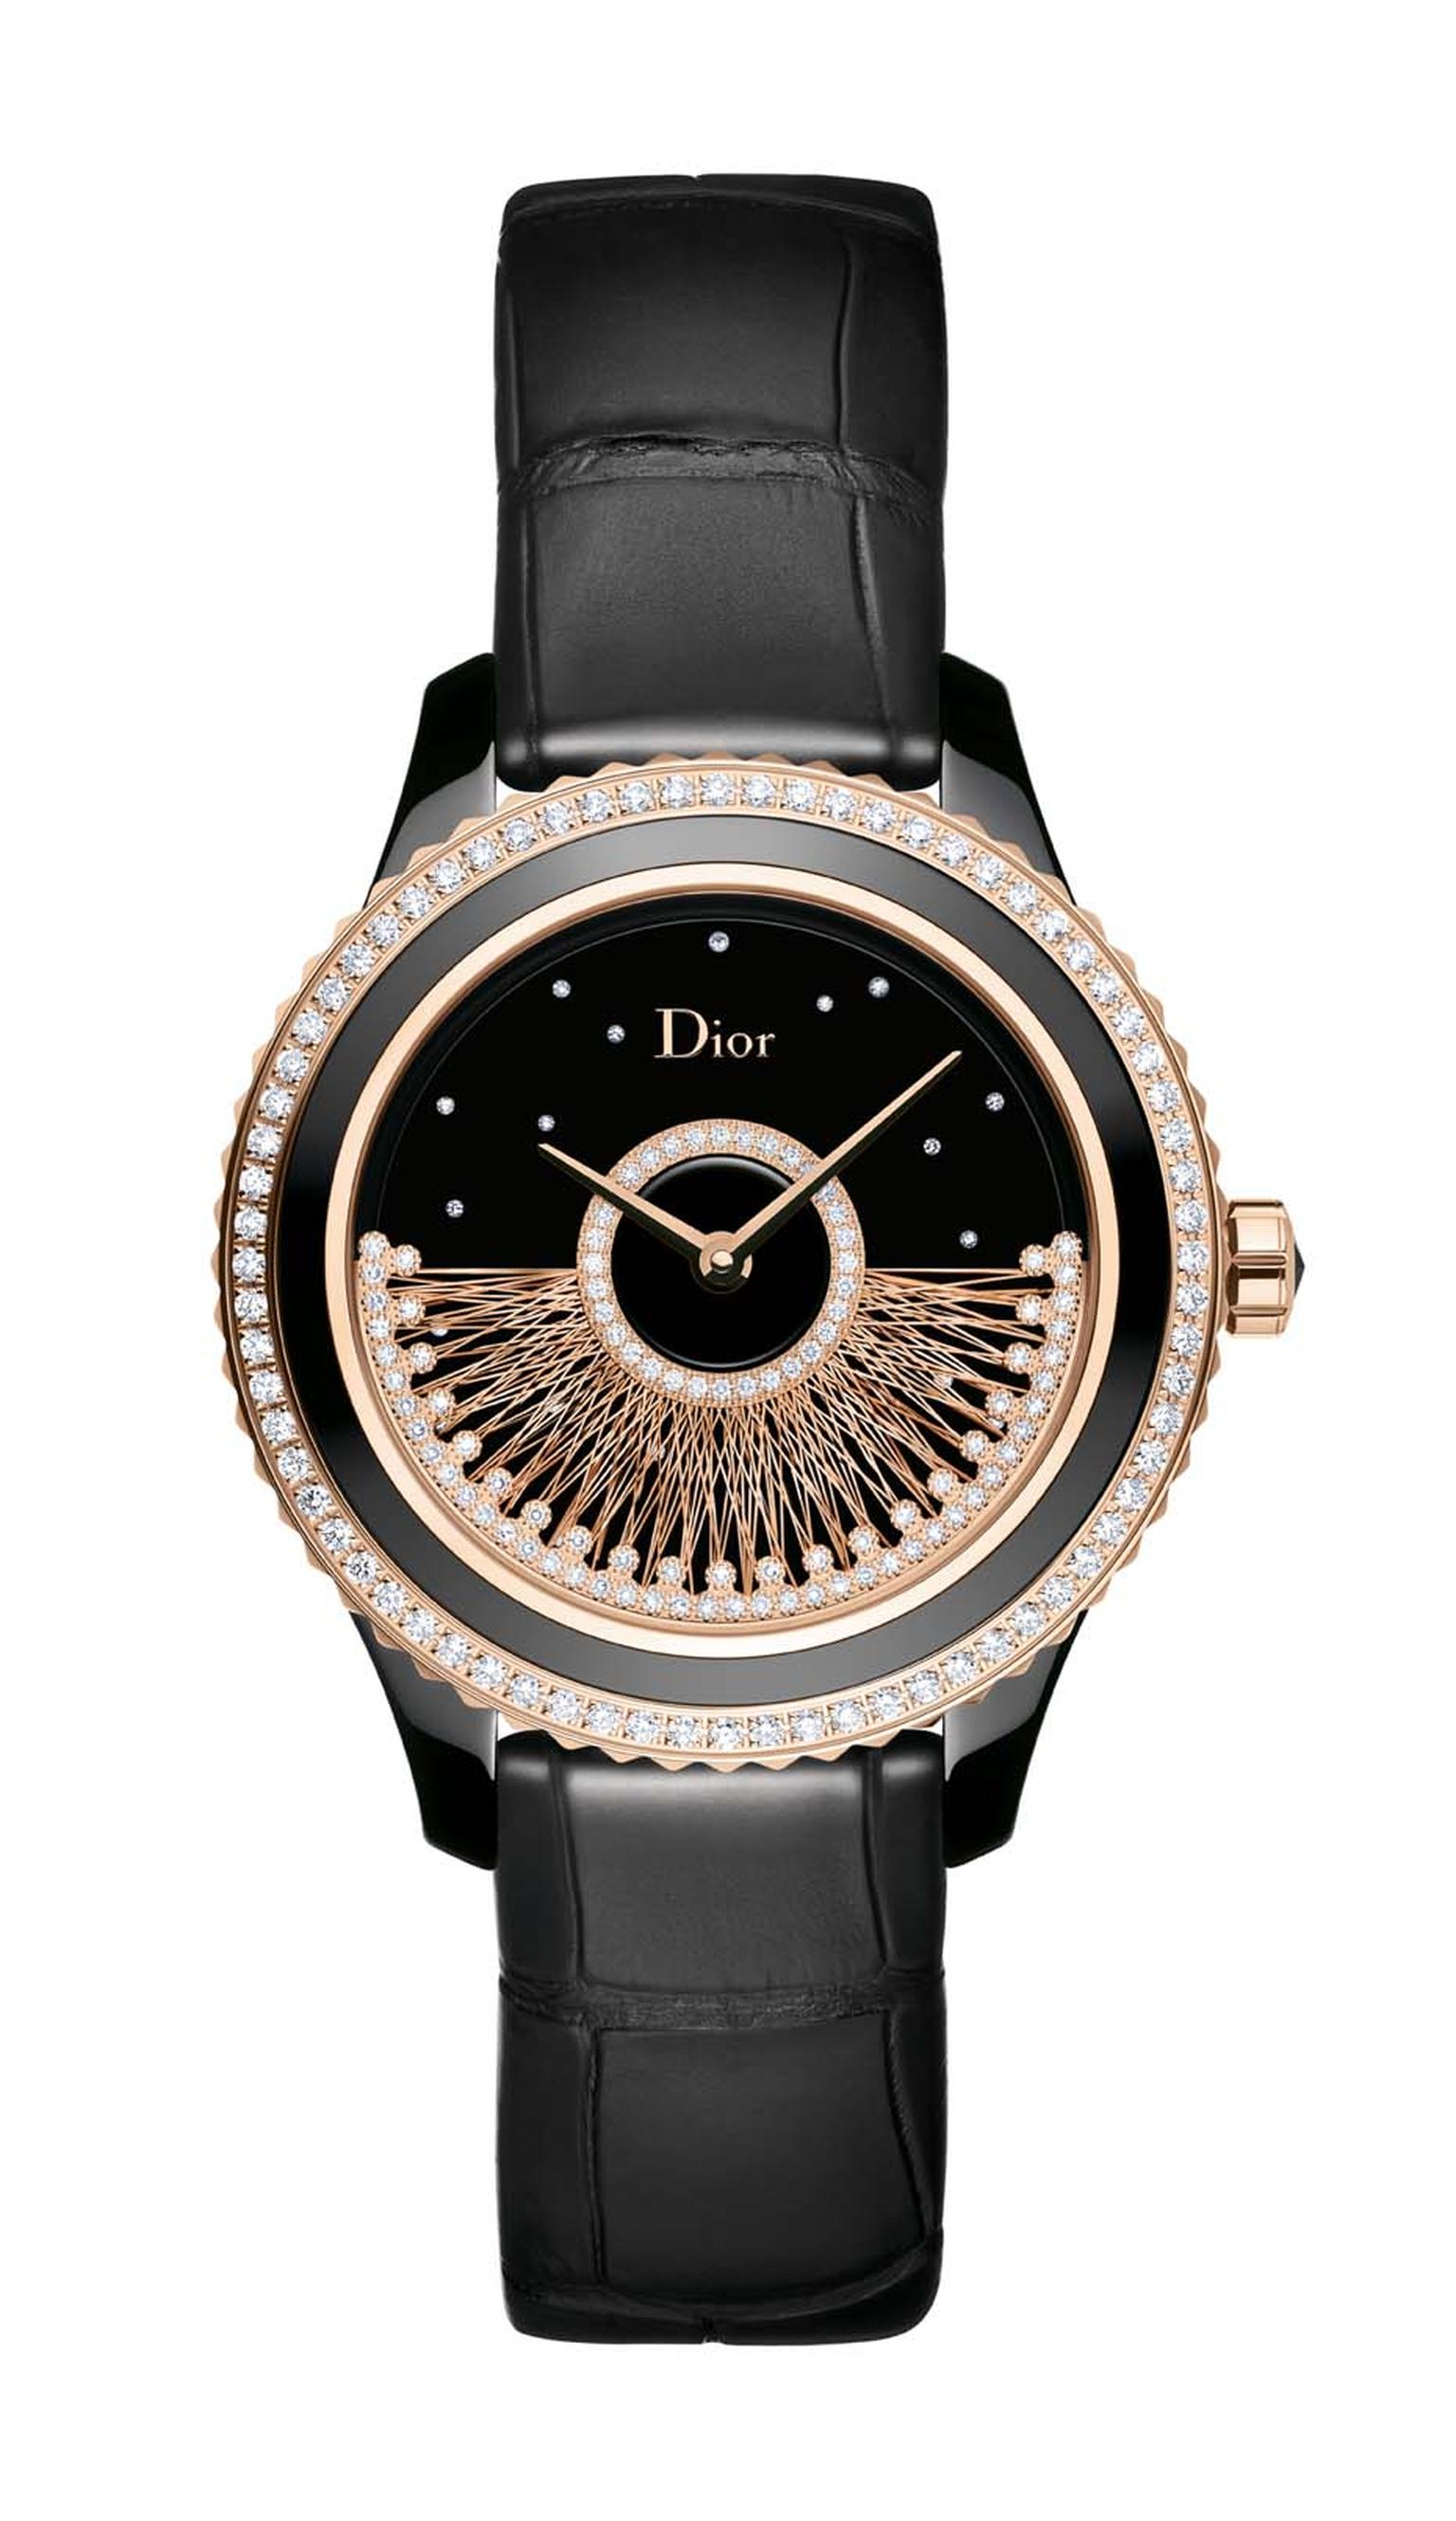 Dior VIII Grand Bal Fil d'Or watch in a 38mm pink gold and black ceramic case features a gold thread rotor hemmed with diamonds set against a black lacquered dial studded with diamonds. Limited edition of 88 pieces.